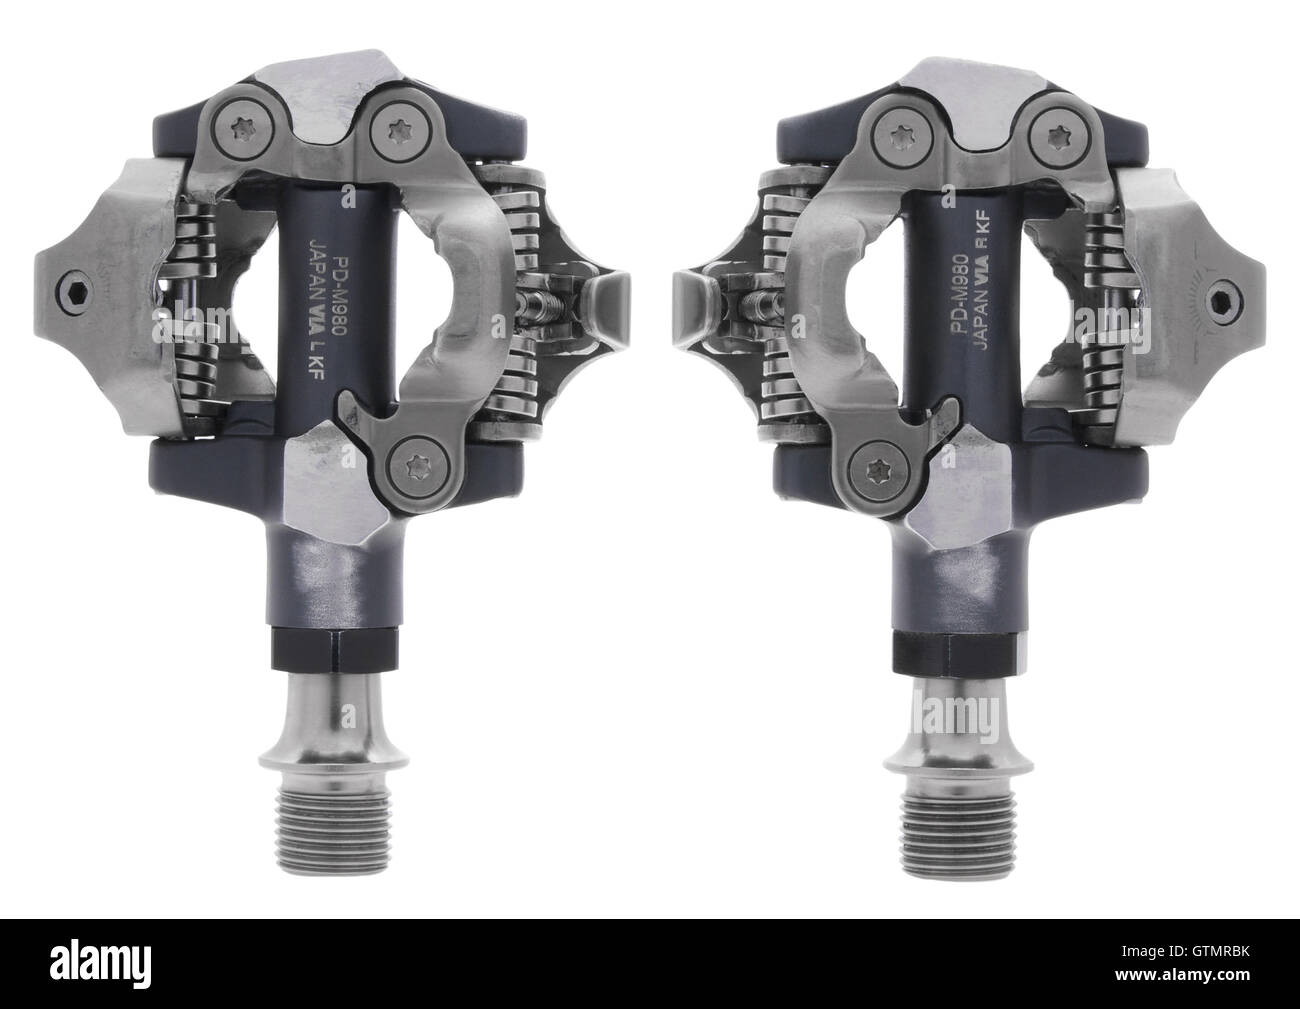 Shimano XTR PD-M980 pedals on white background Stock Photo